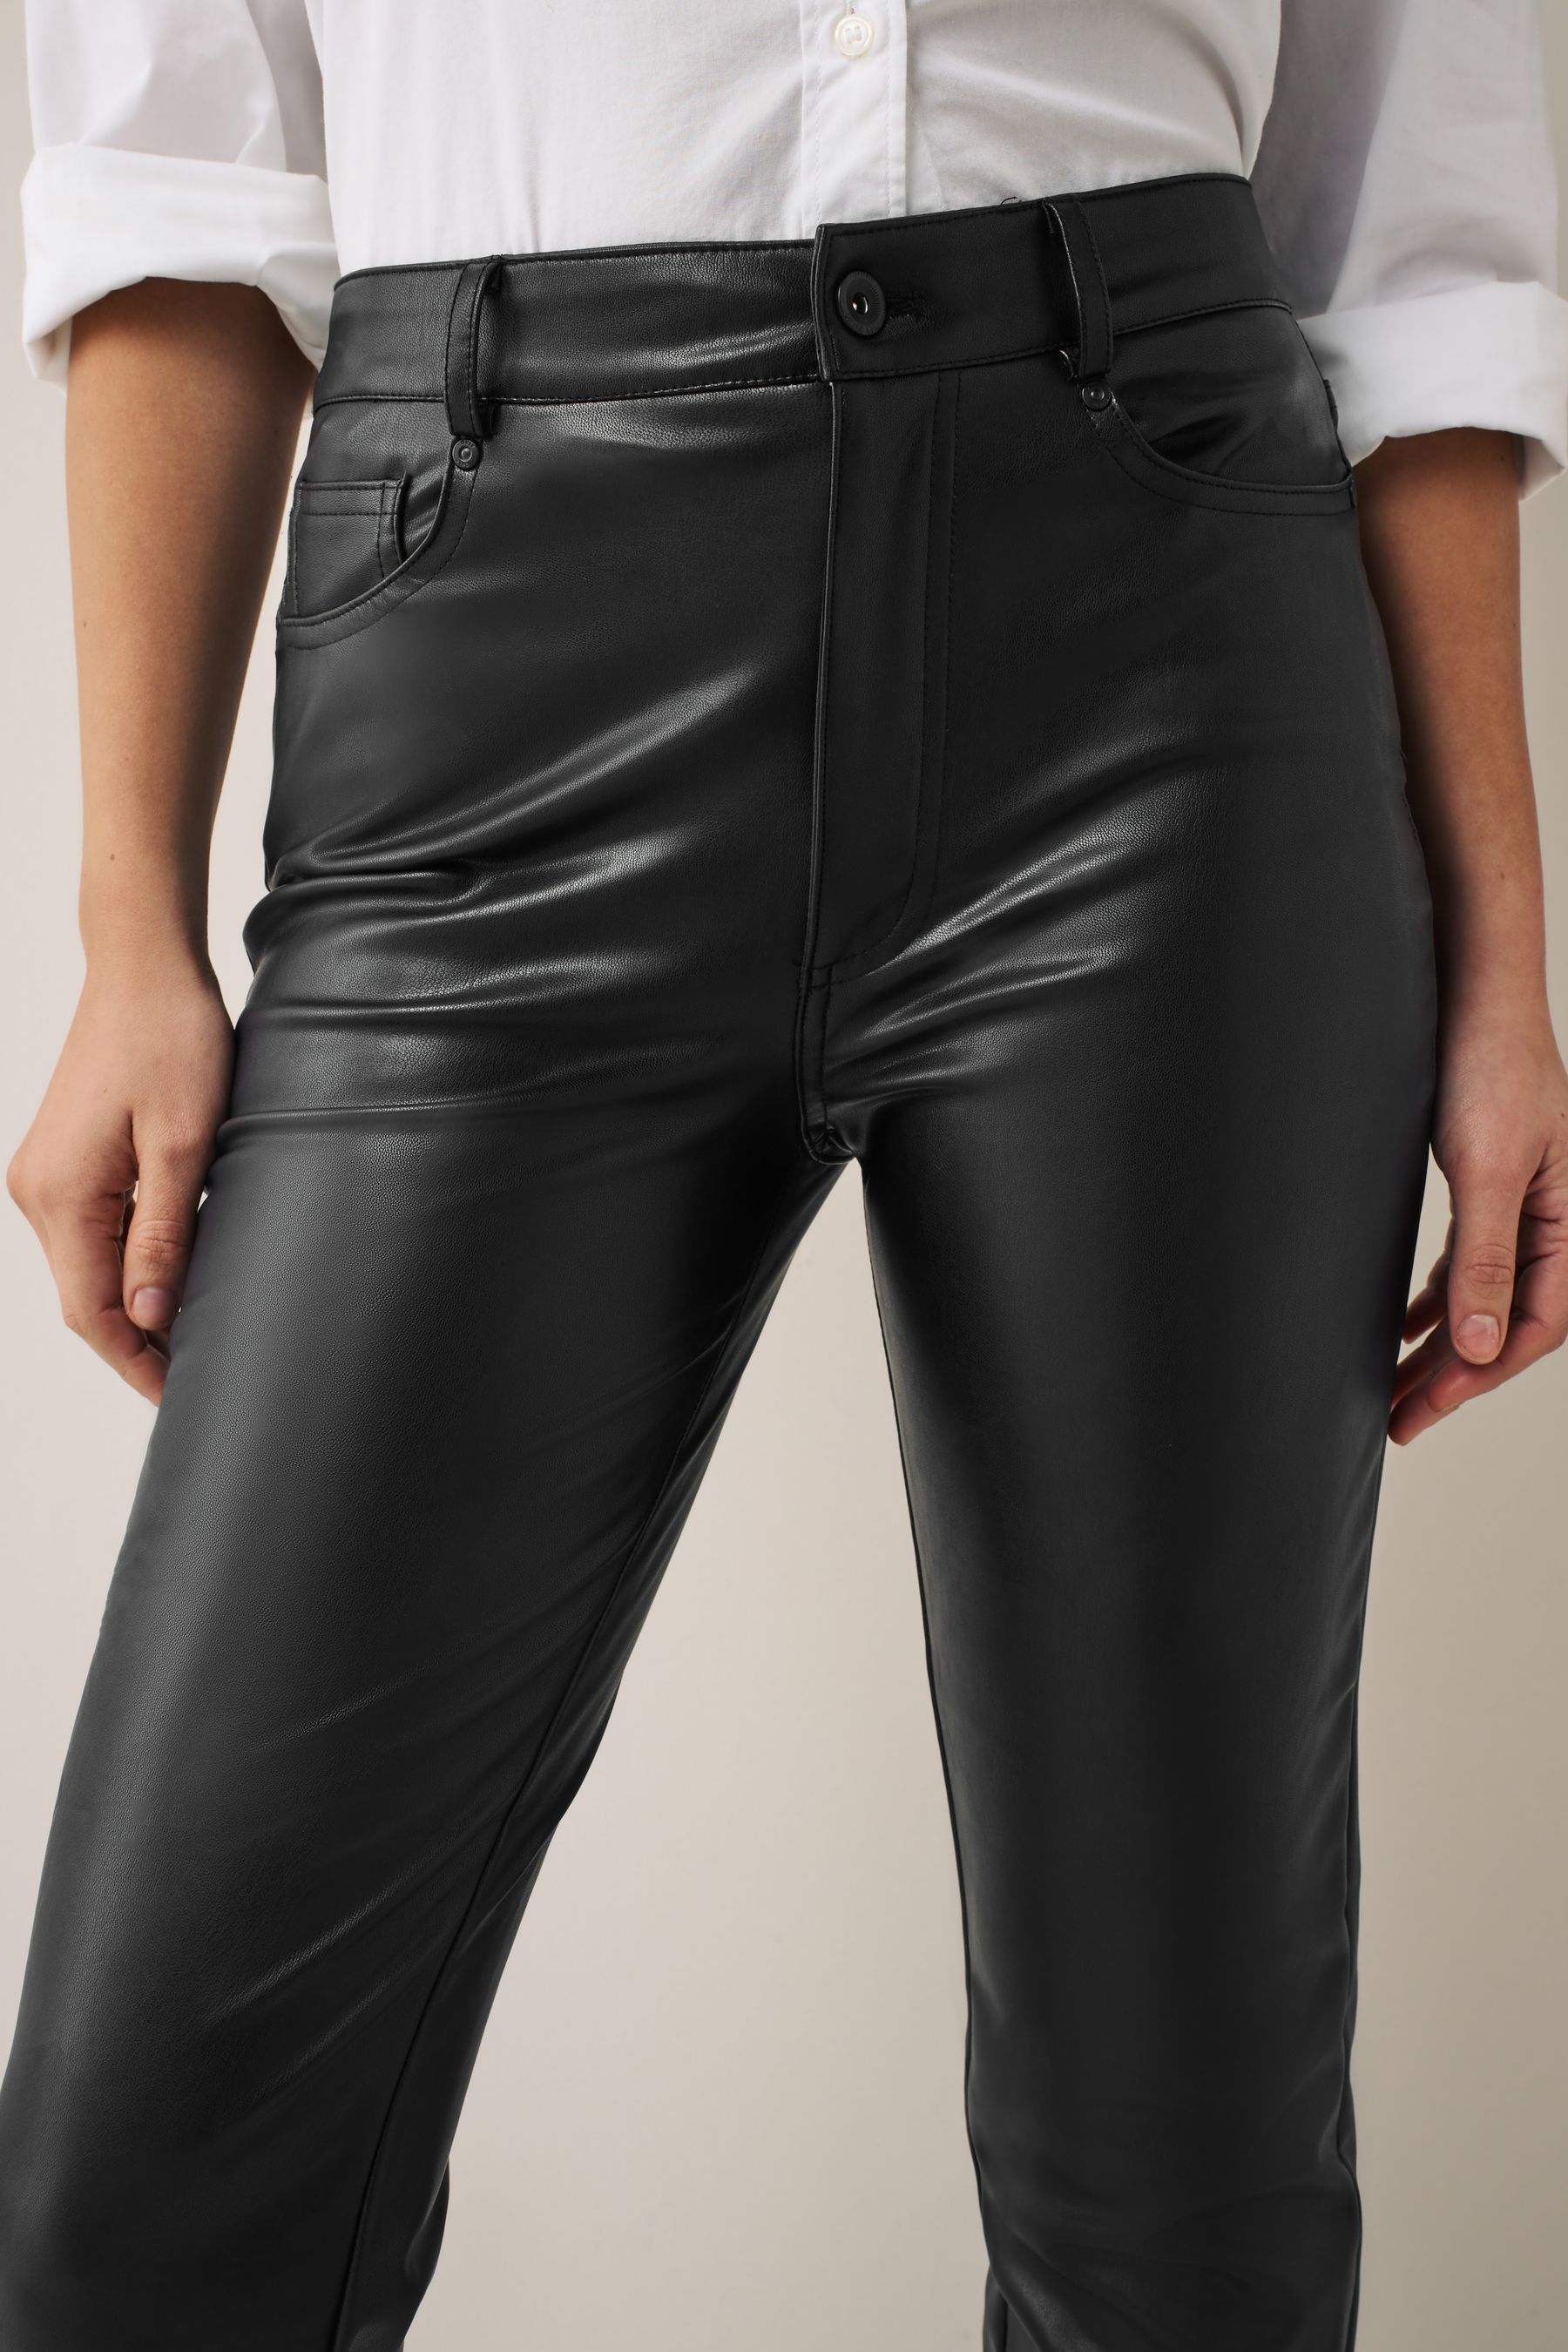 Buy Only Black High Waisted Faux Leather Workwear Trousers from the ...